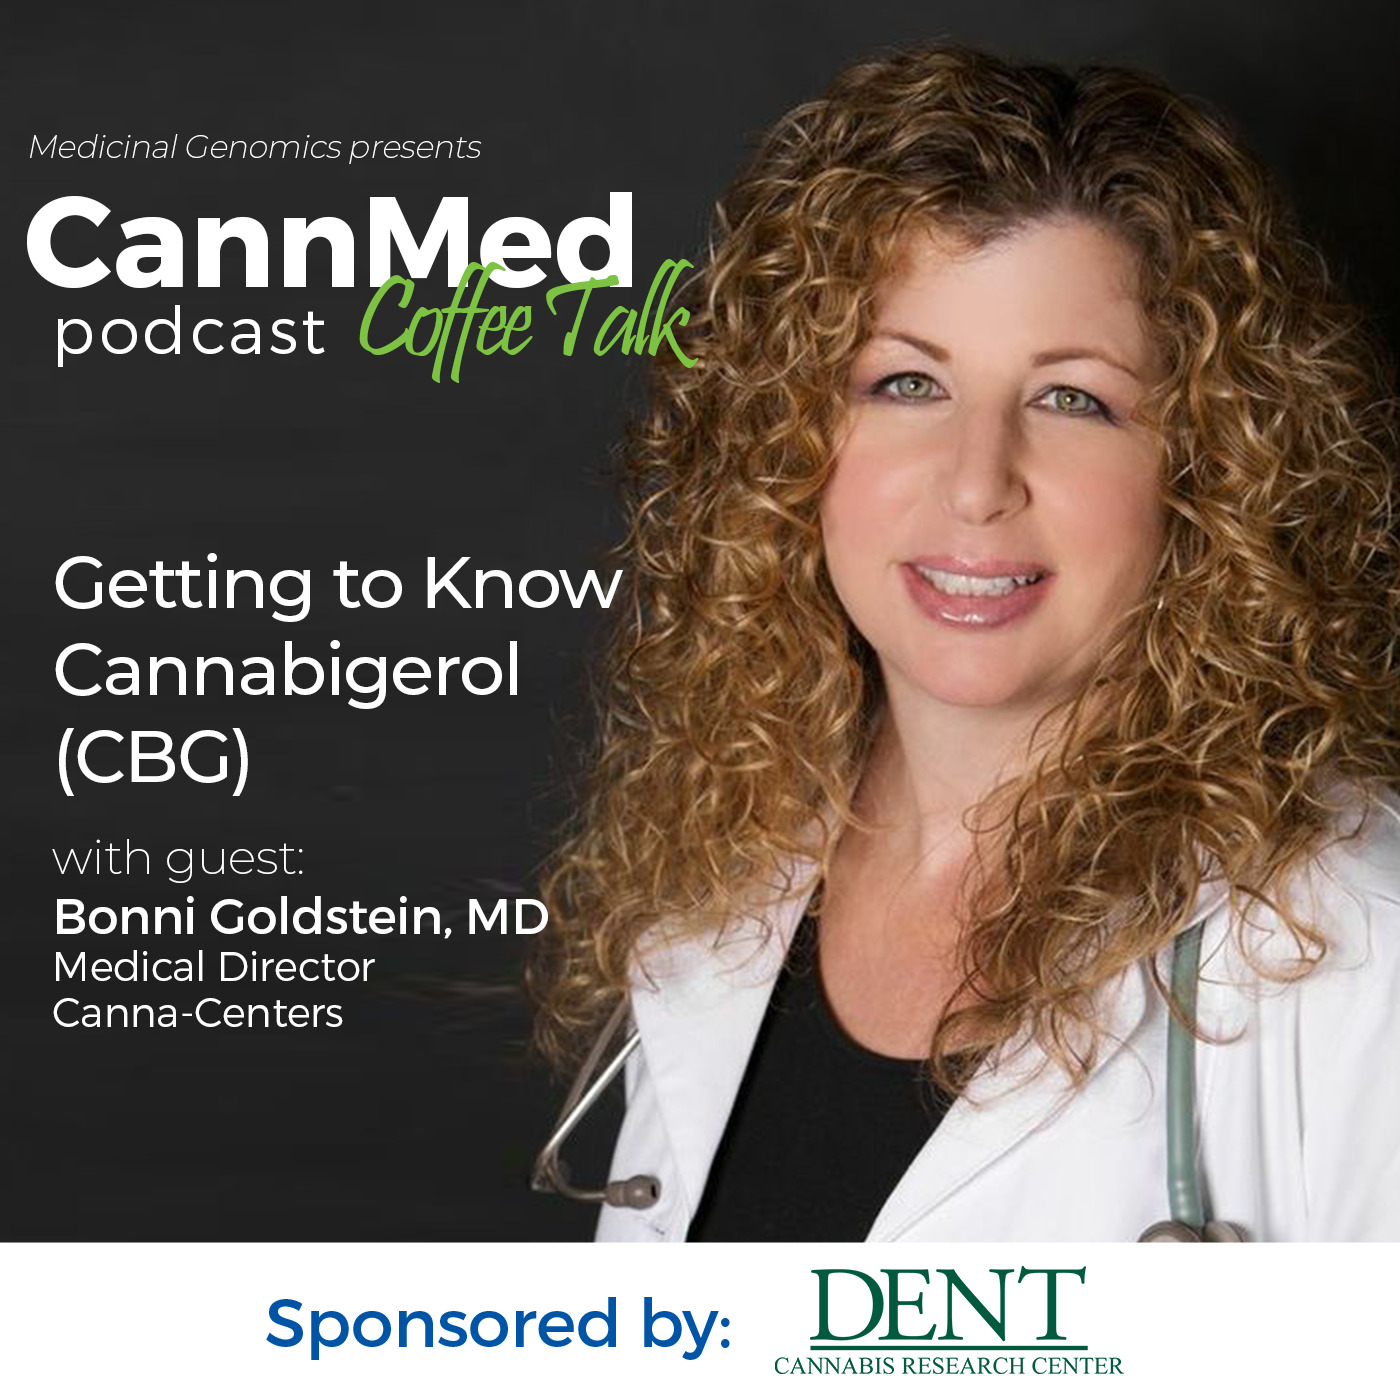 Featured image for “Getting to Know Cannabigerol (CBG) with Bonni Goldstein, MD”